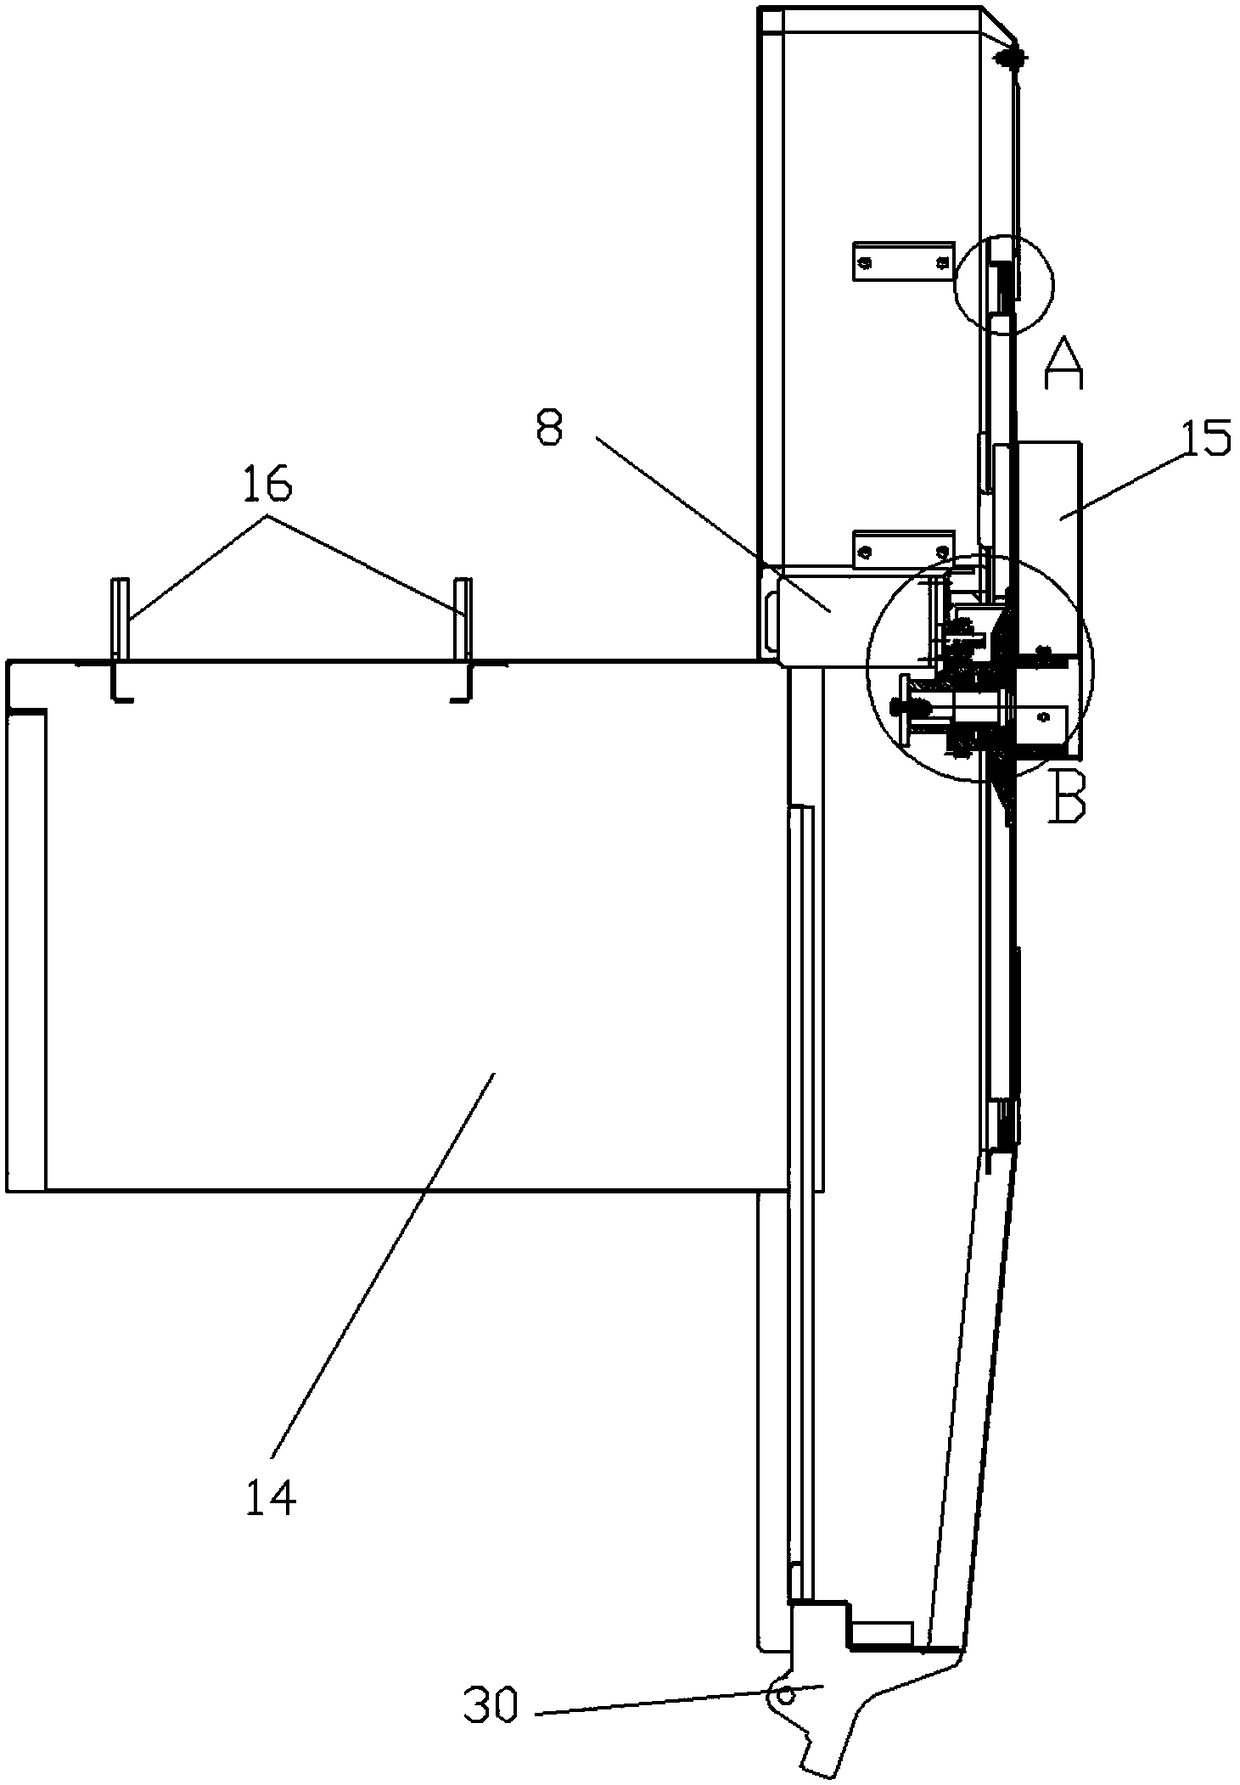 A self-rotating dust-removing device for a dust-proof mesh cover of an engine water tank